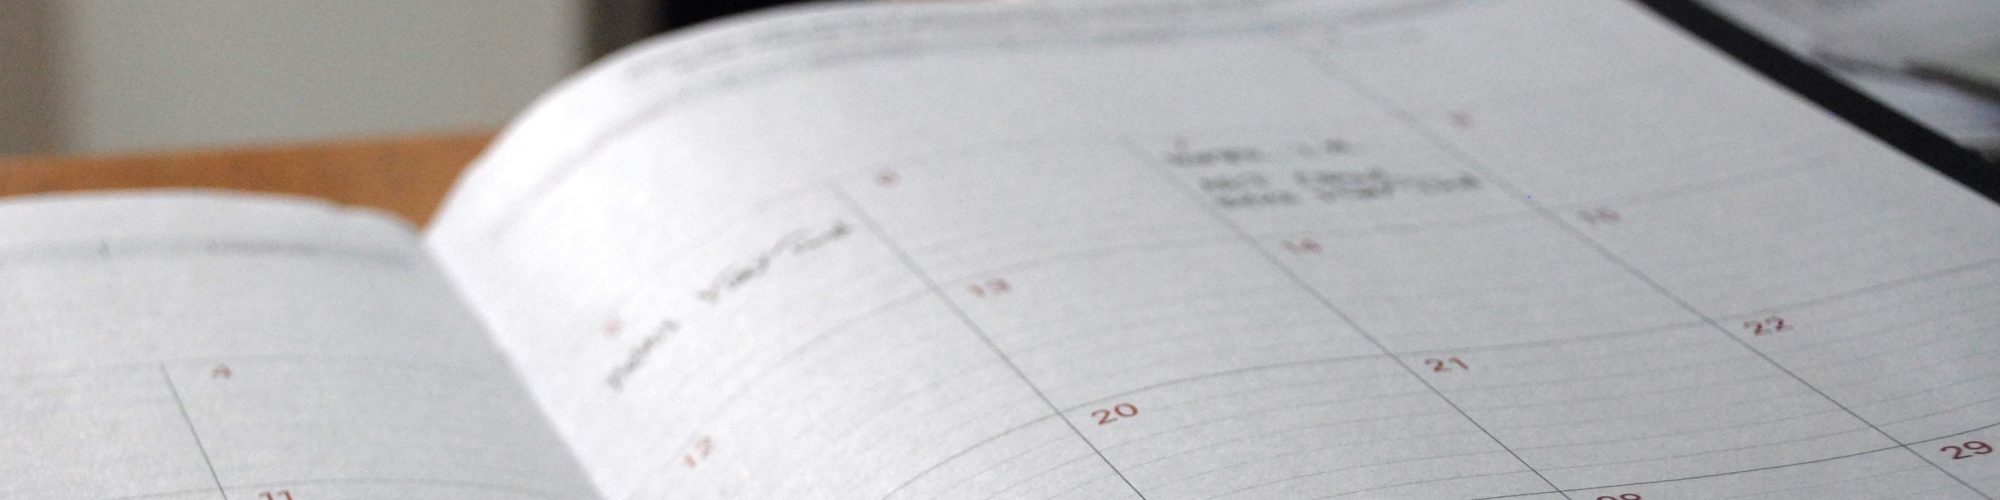 6 of the top employee scheduling tools for 2022